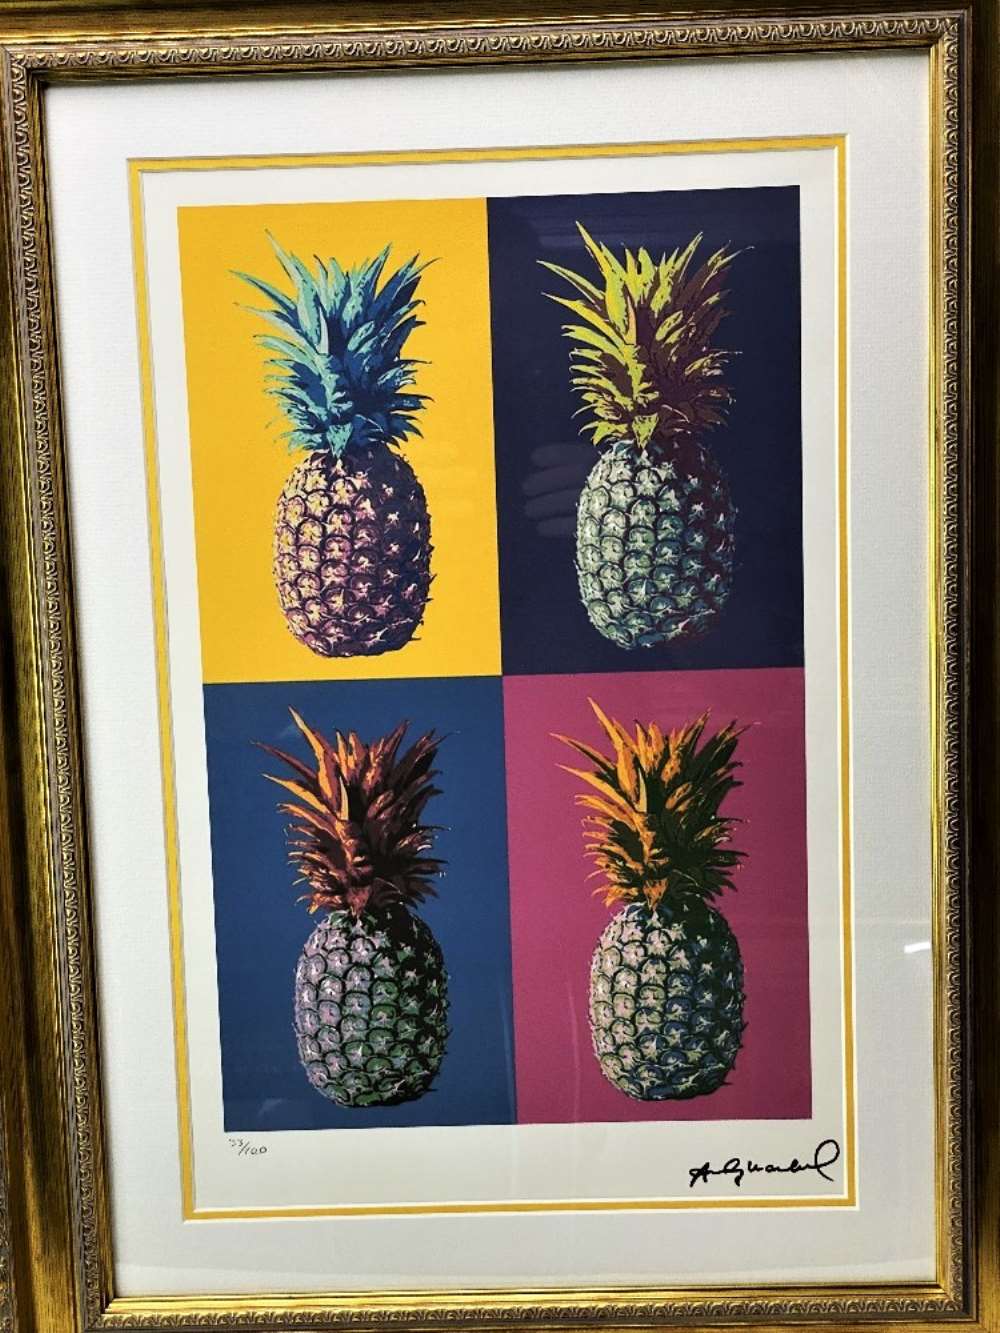 Andy Warhol-(1928-1987) "Pineapple"Castelli NY Original Numbered Lithograph #21/100, Ornate Framed. - Image 5 of 5